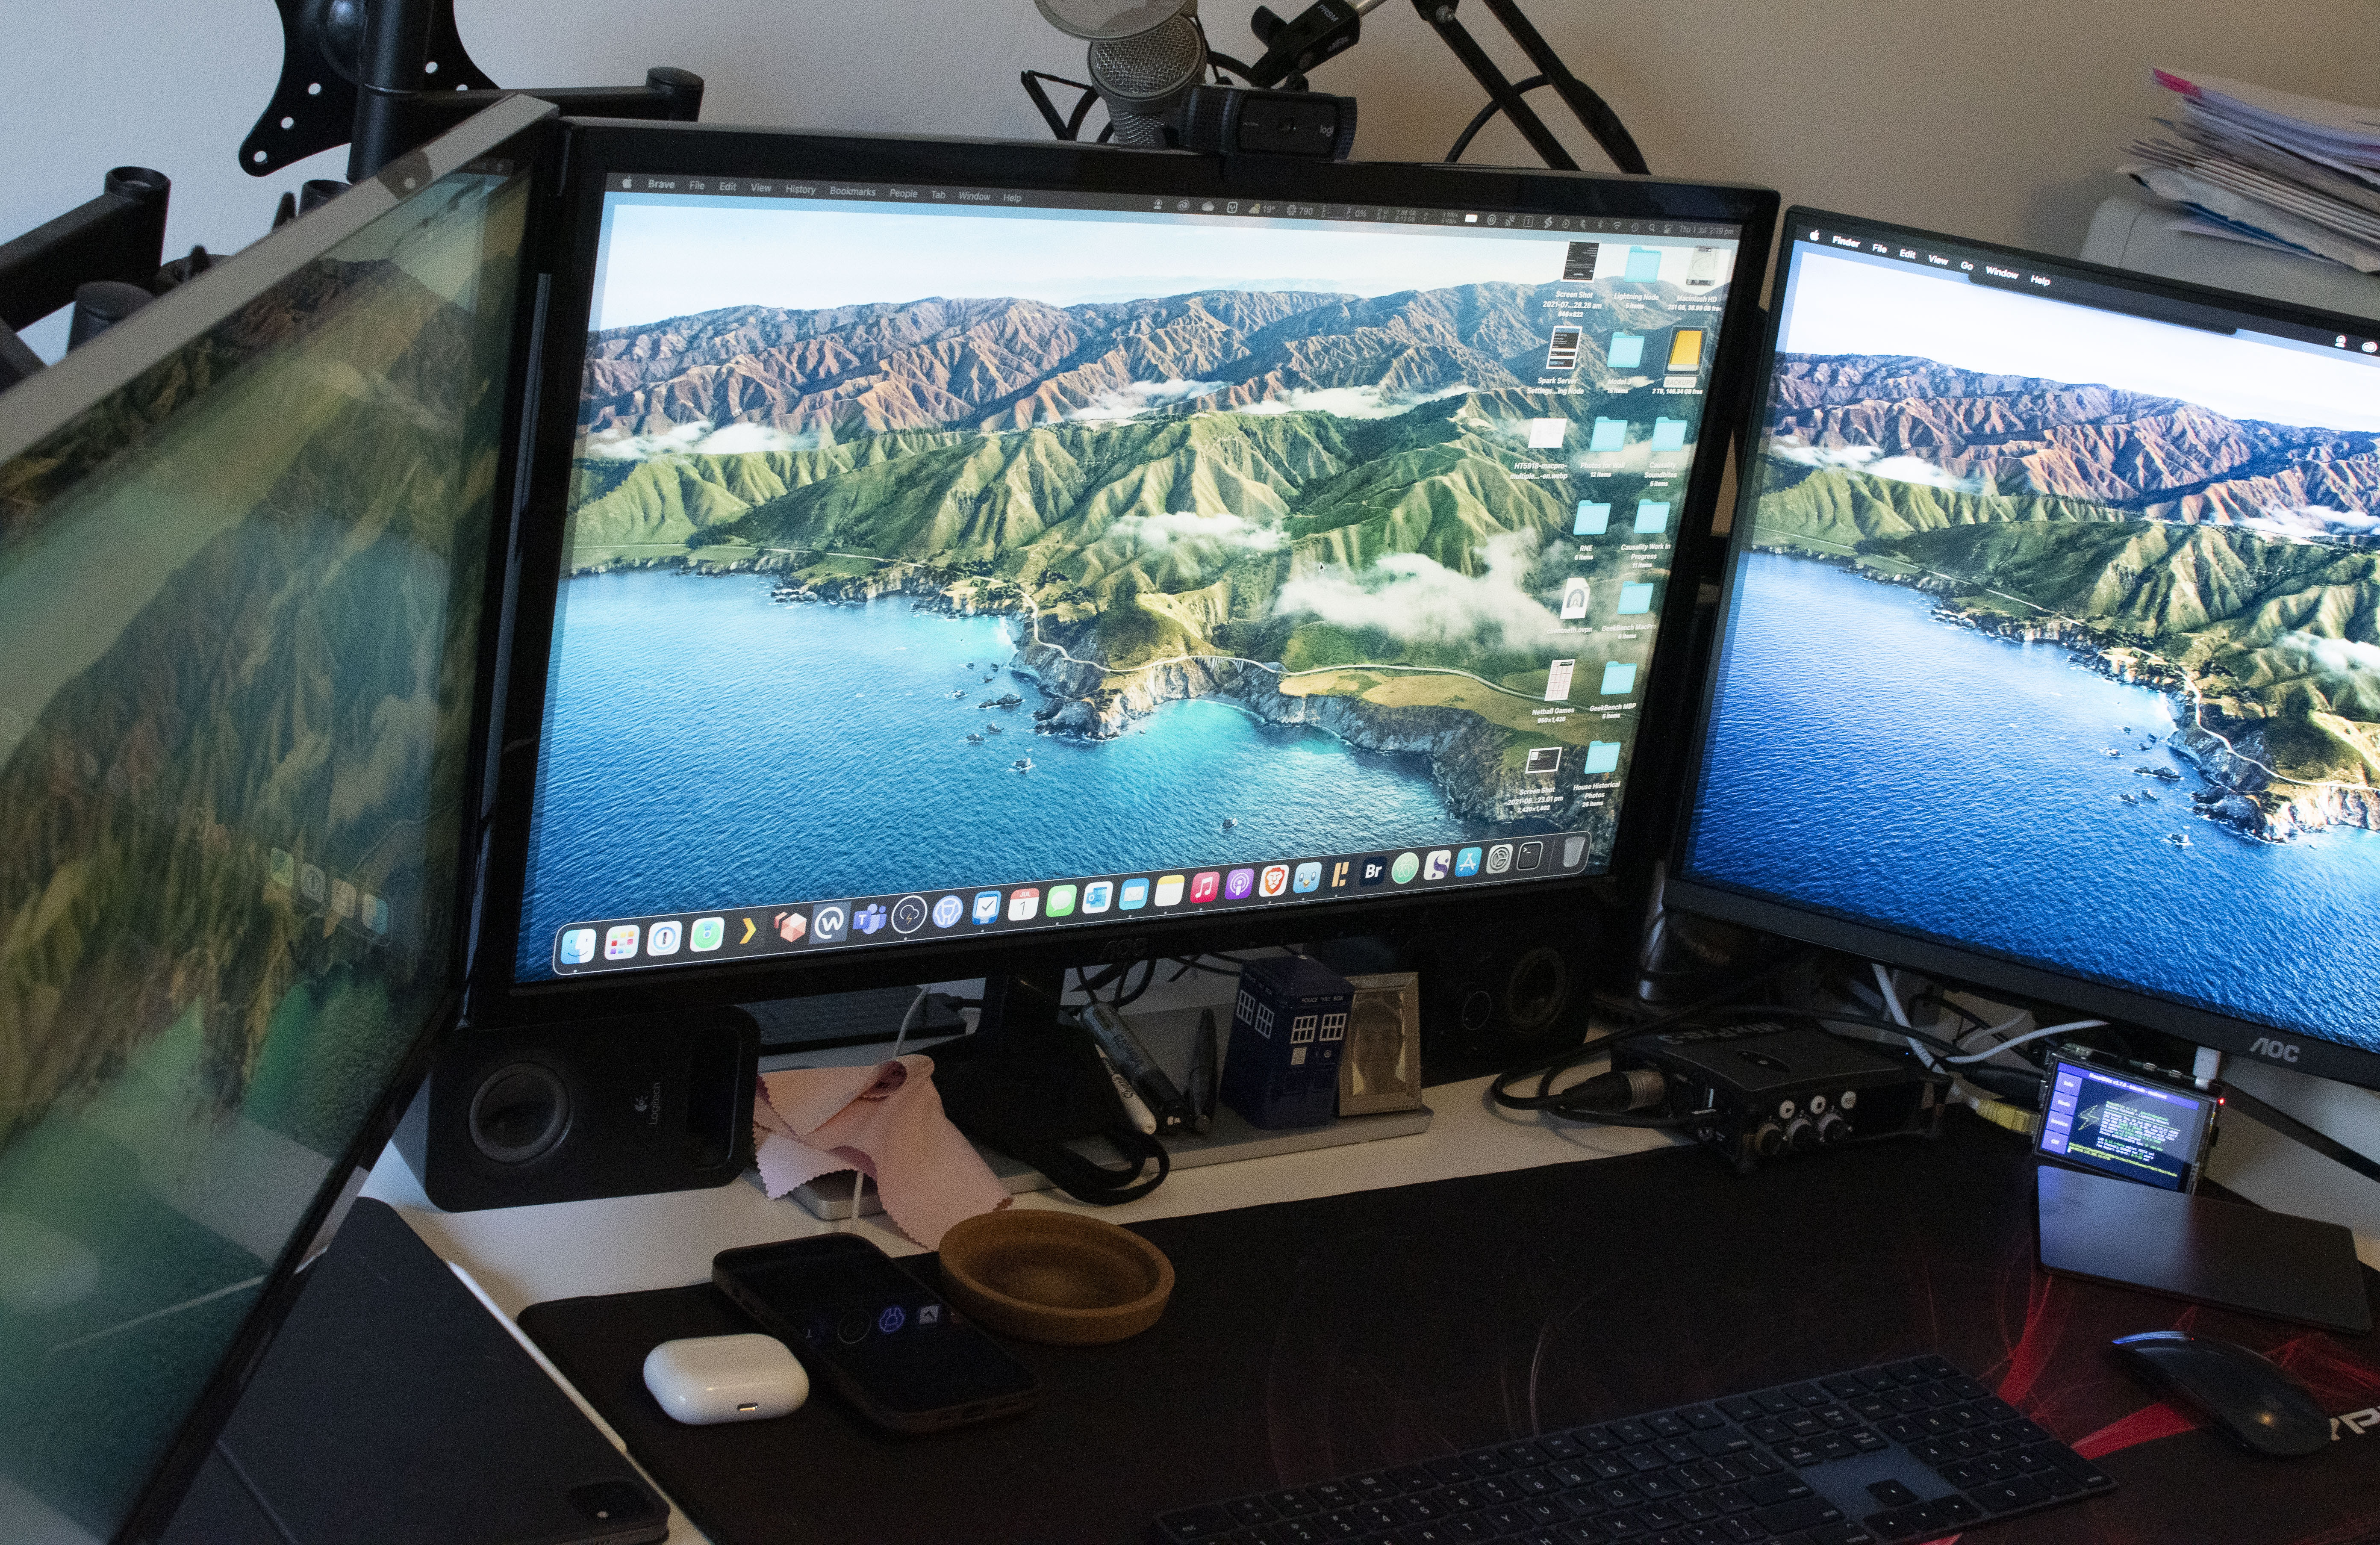 New Desk Configuration with 3 4K Displays